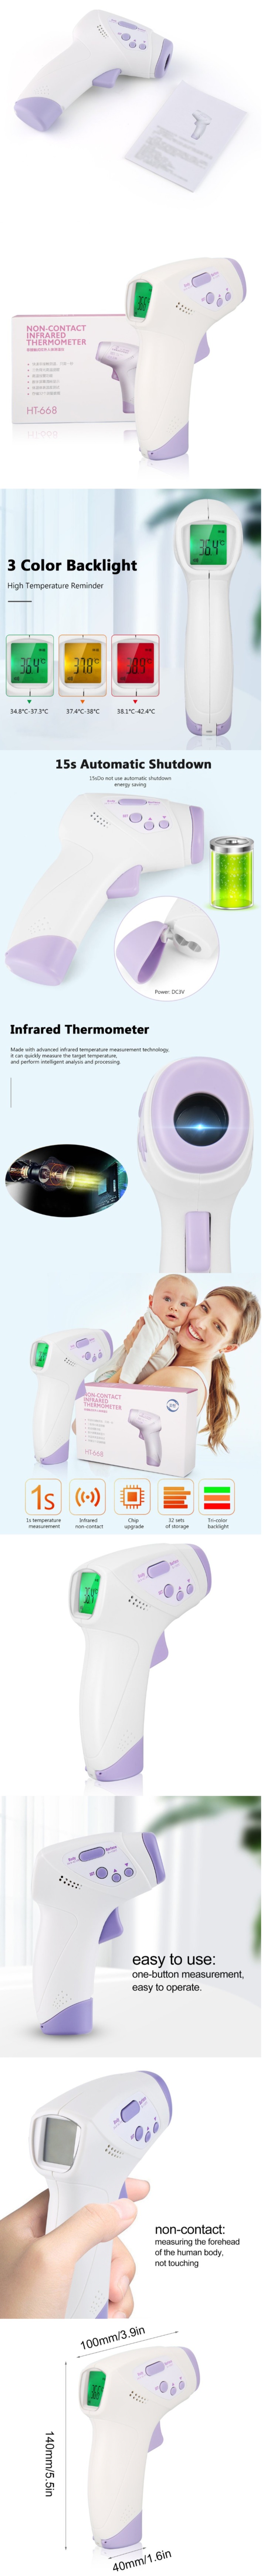 HT-668 Thermometer, Shenzhen Hezhizhou Technology Co Ltd, HT-668 Non-Contact Infrared Thermometer, Patent Number 2014300130504, Medical Device Manufactures Licence, Hand-held Thermometer, Infrared Temperature Gun, Digital Thermometere, Digital Temperature Gun,